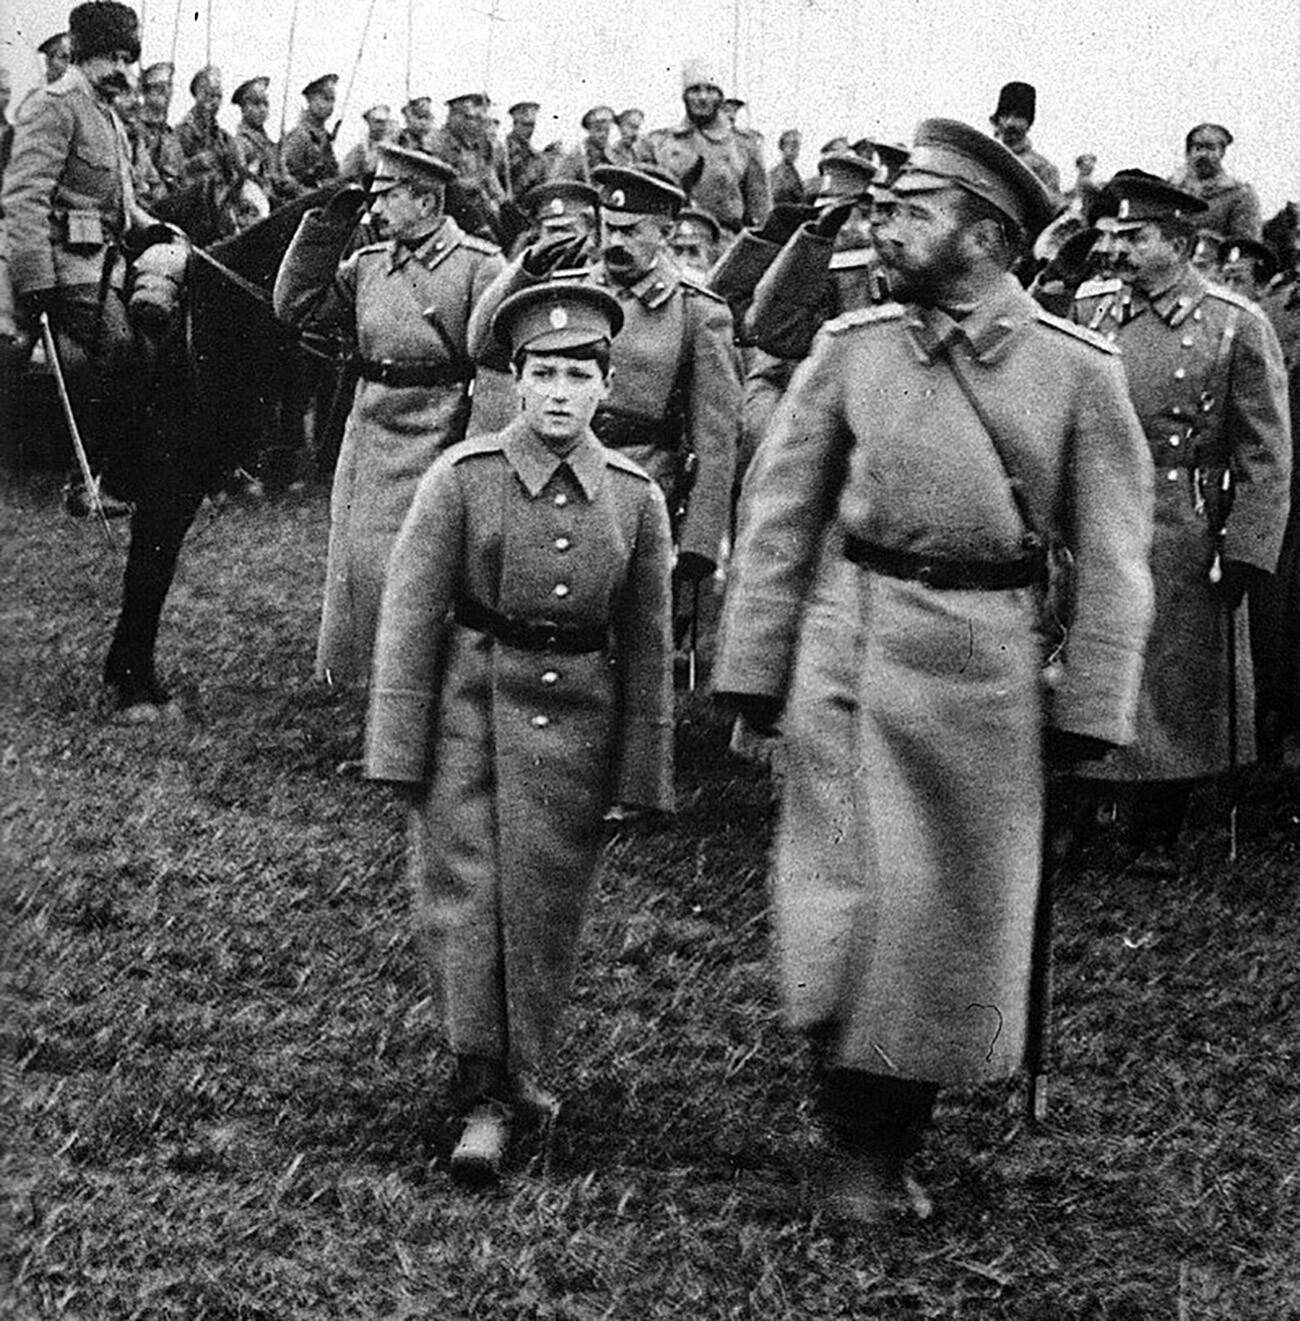 Nicholas II and tsesarevich Alexei at the location of the military units, 1916